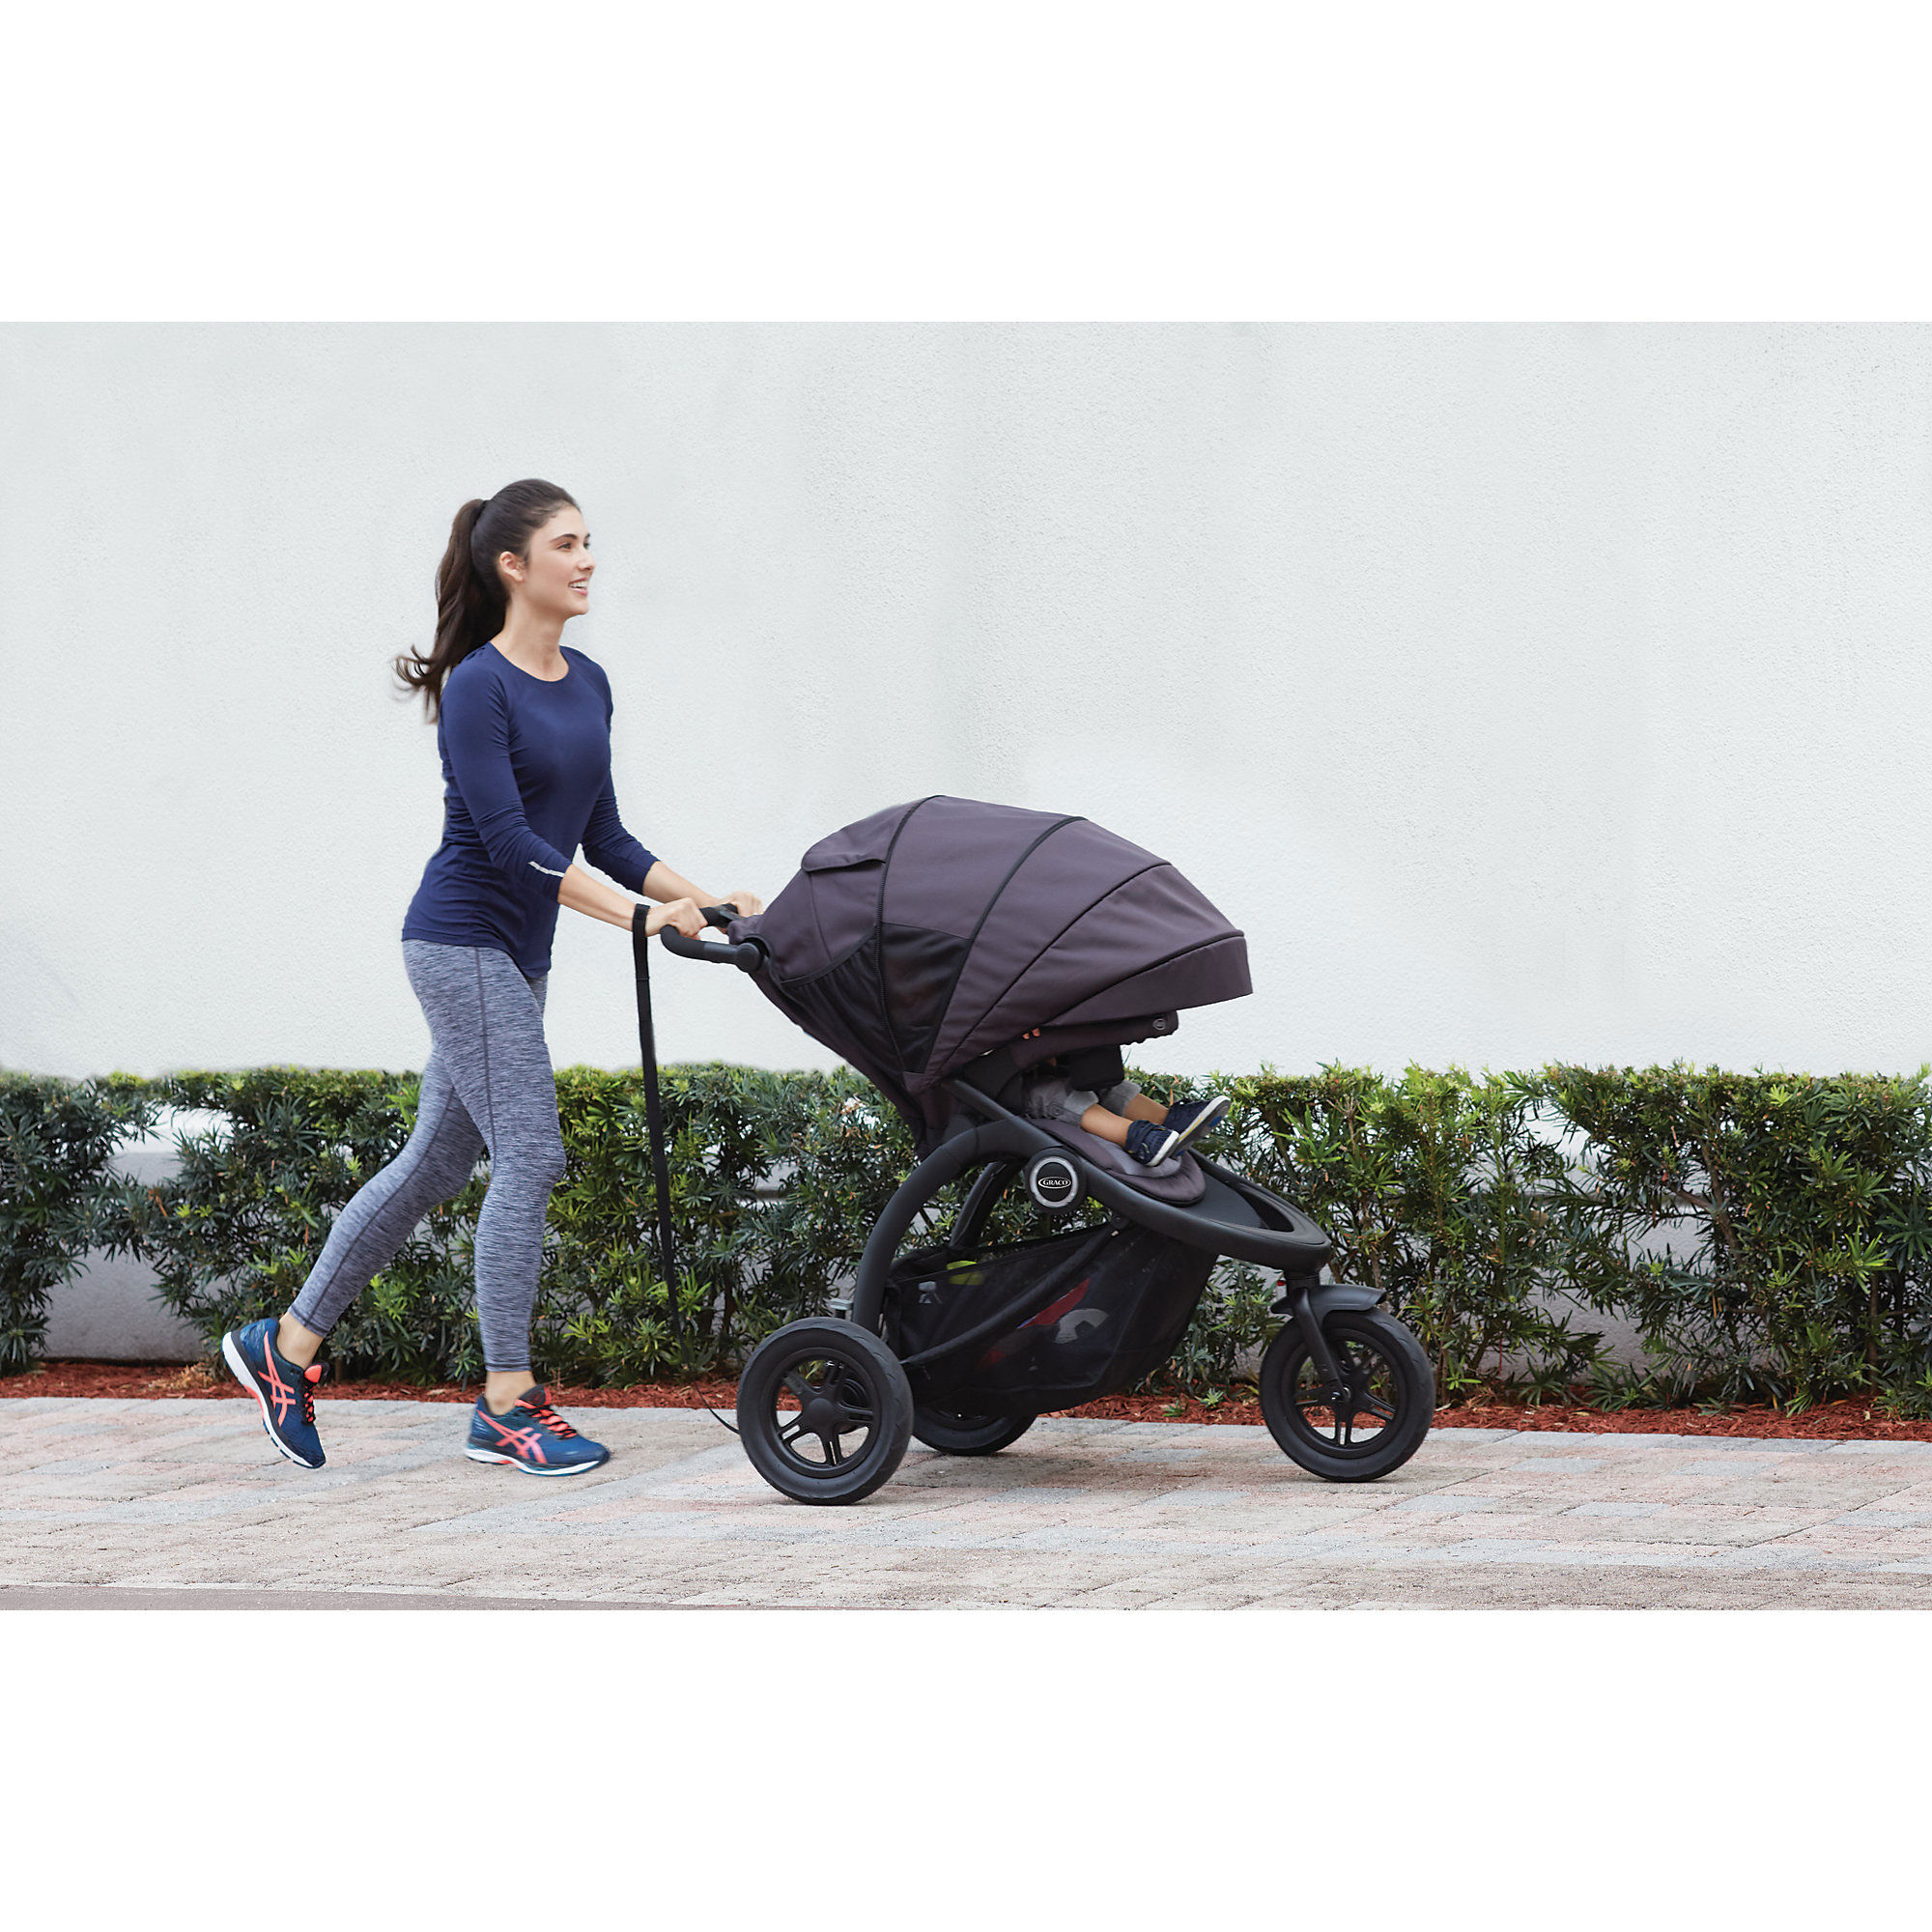 trailrider jogger travel system by graco reviews